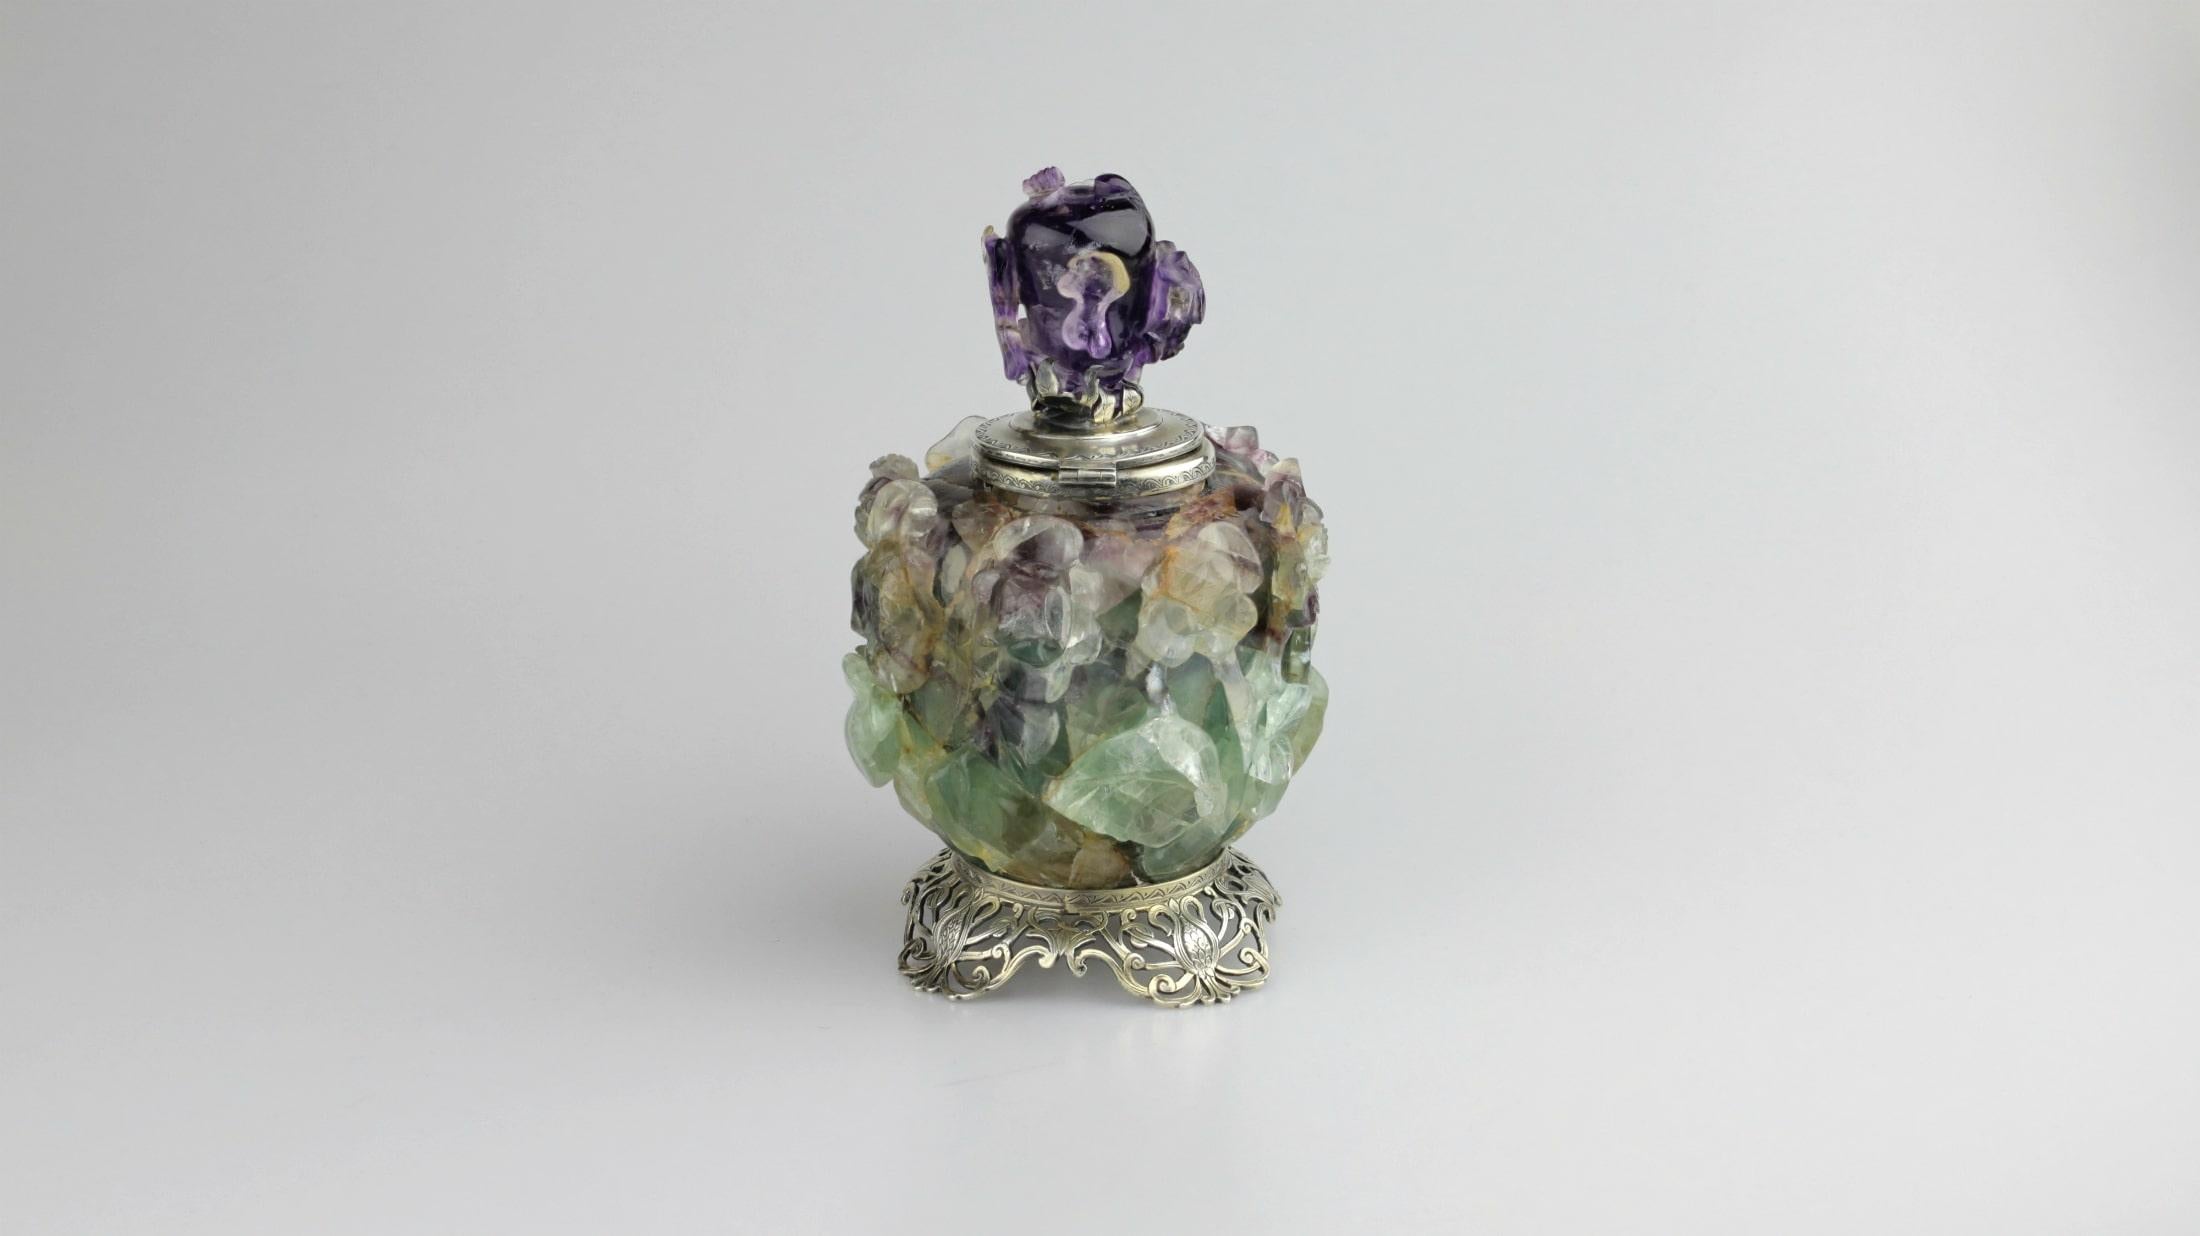 A monumental inkwell by New York identity, Edward I. Farmer. The piece consists of a large piece of carved fluorite and a carved amethyst finial which has all been set in sterling silver. The mount for these carved stones is elaborate with a floral